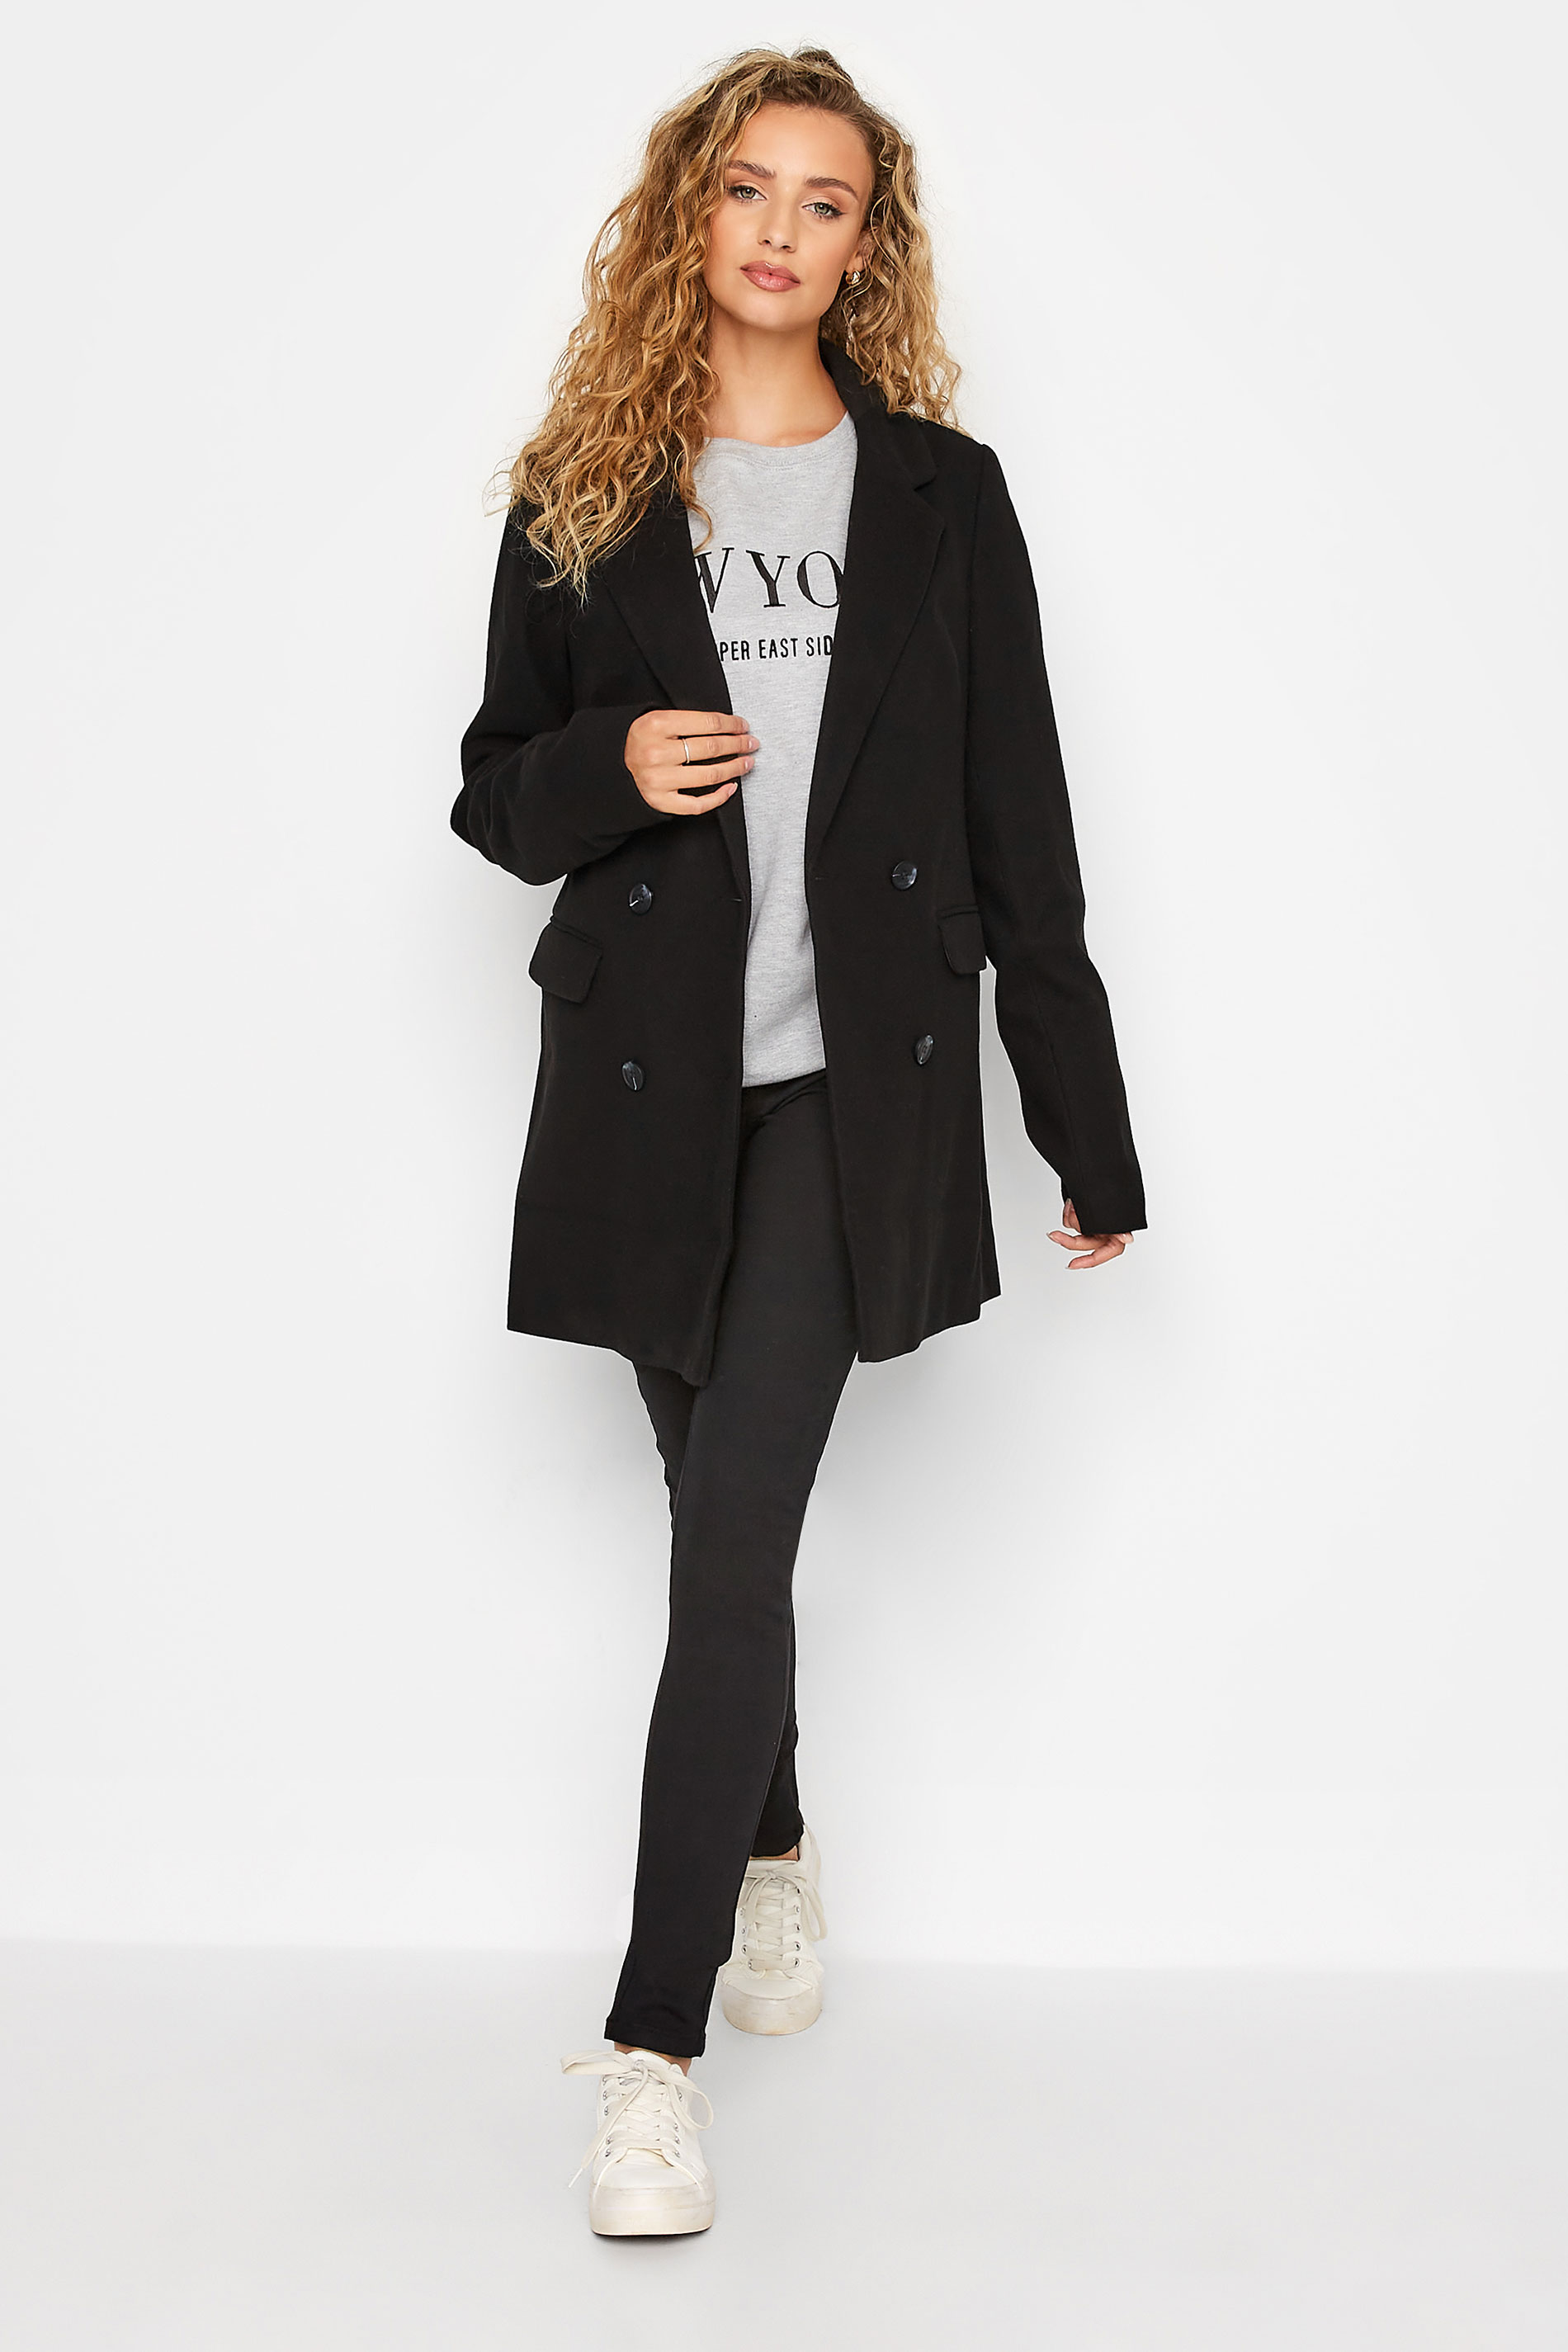 LTS Tall Women's Black Double Breasted Brushed Jacket | Long Tall Sally 2